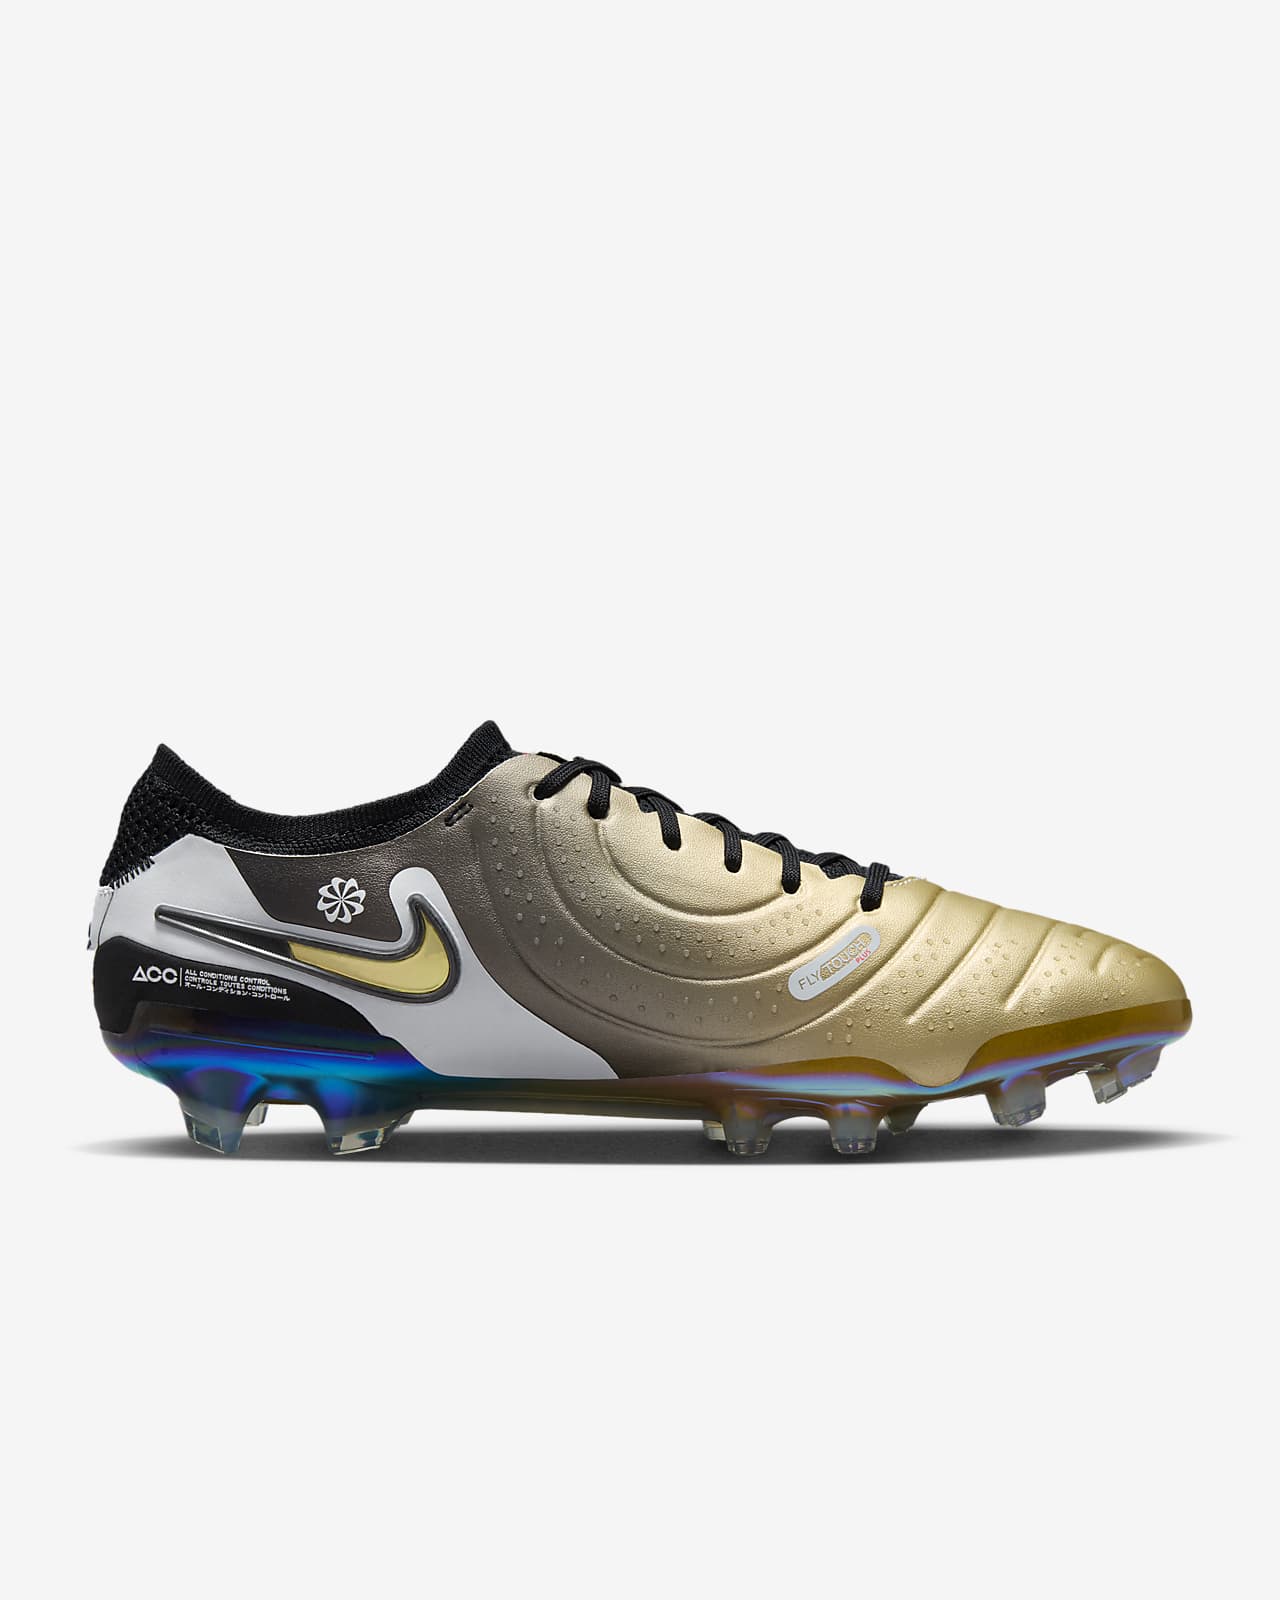 cool soccer cleats